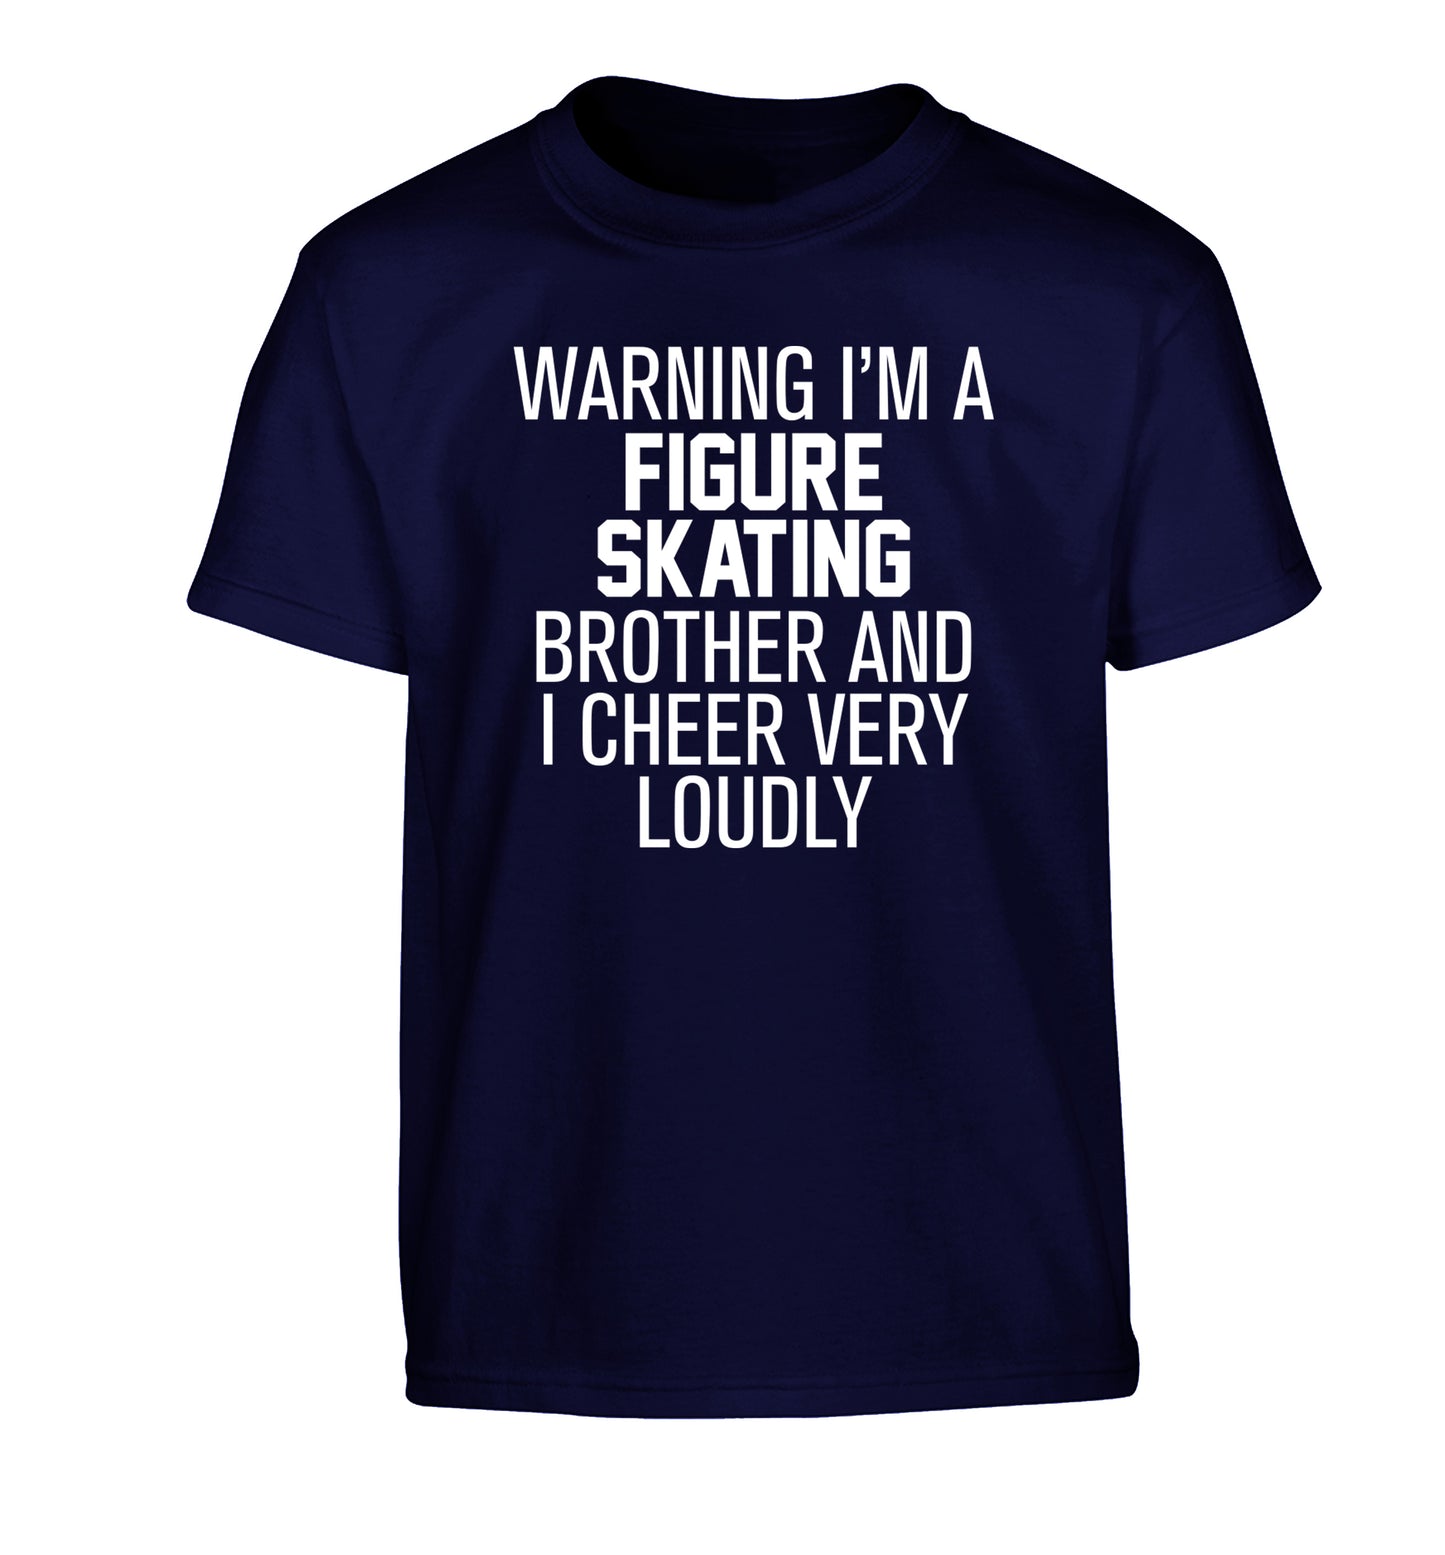 Warning I'm a figure skating brother and I cheer very loudly Children's navy Tshirt 12-14 Years